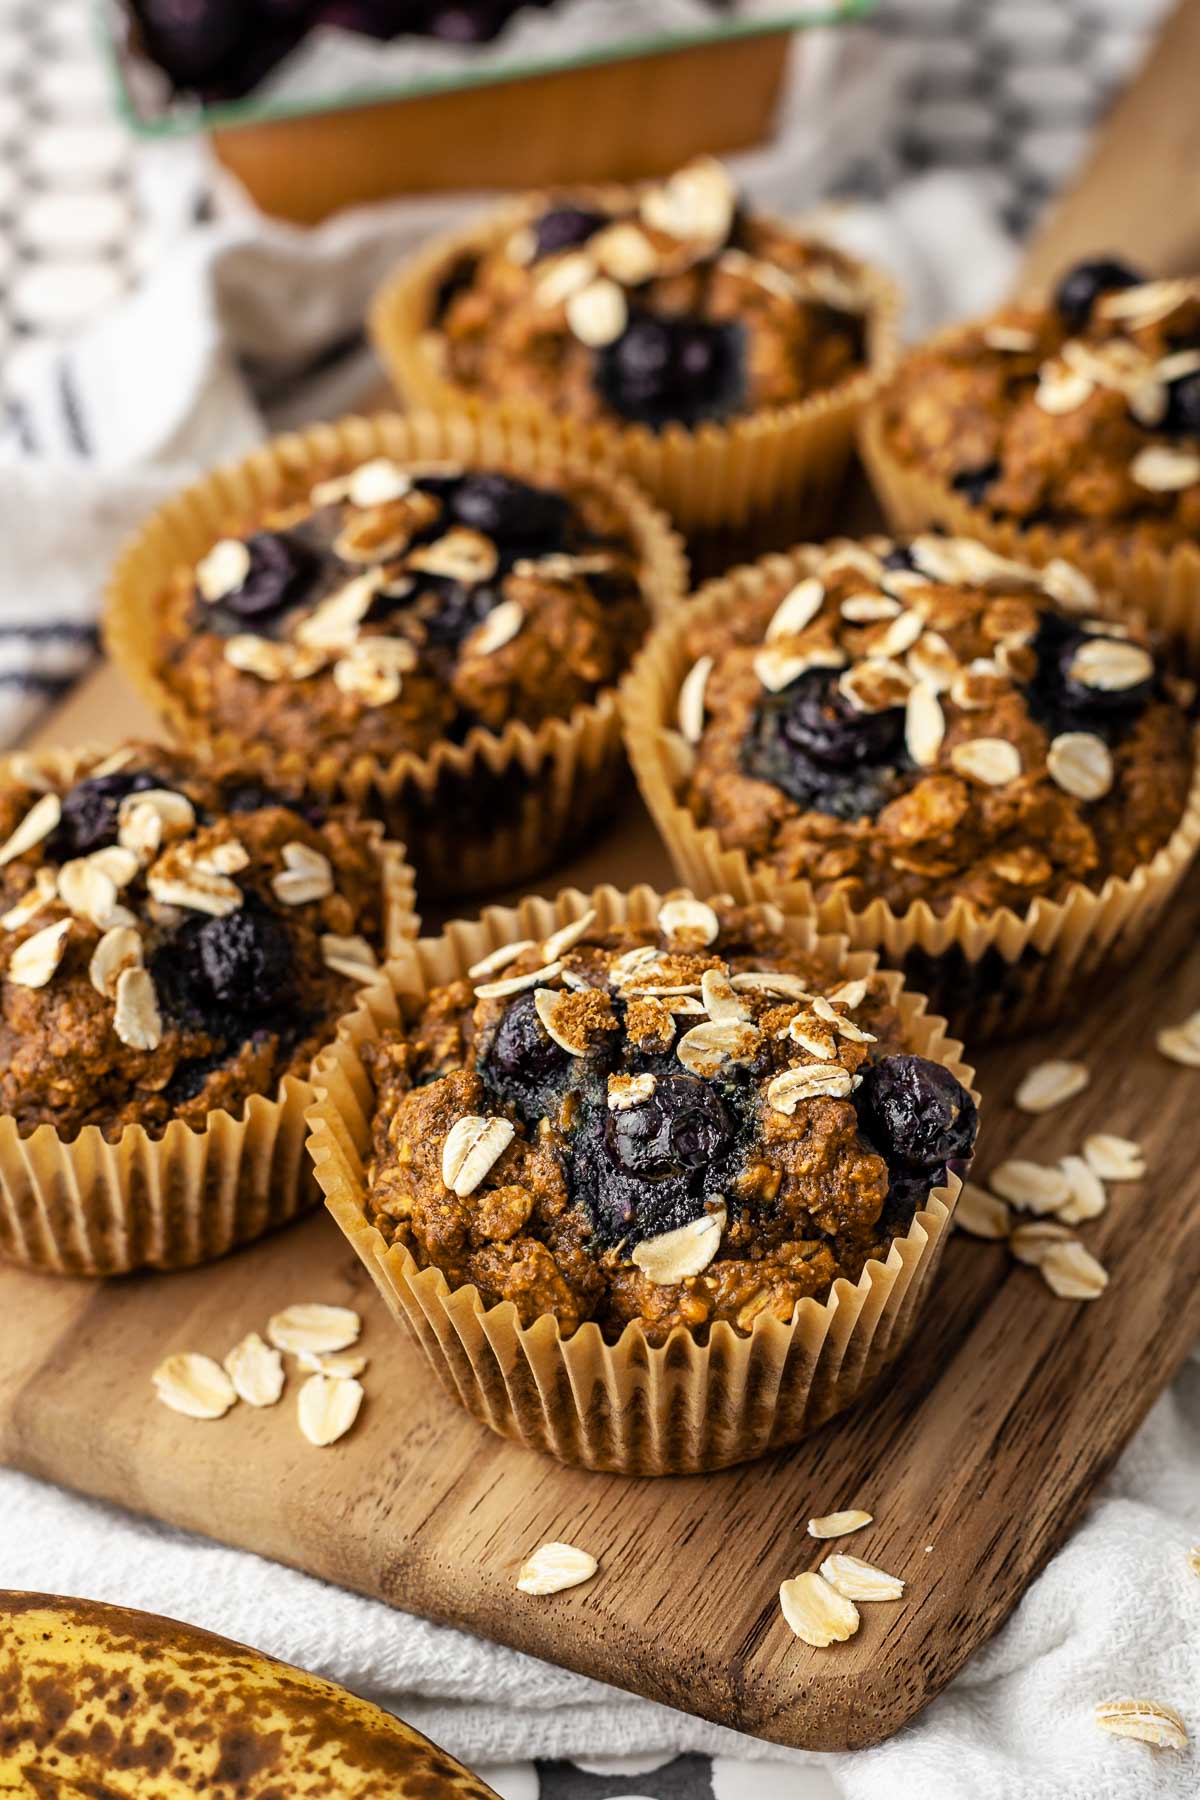 Six blueberry banana oatmeal muffins on a wooden cutting board.